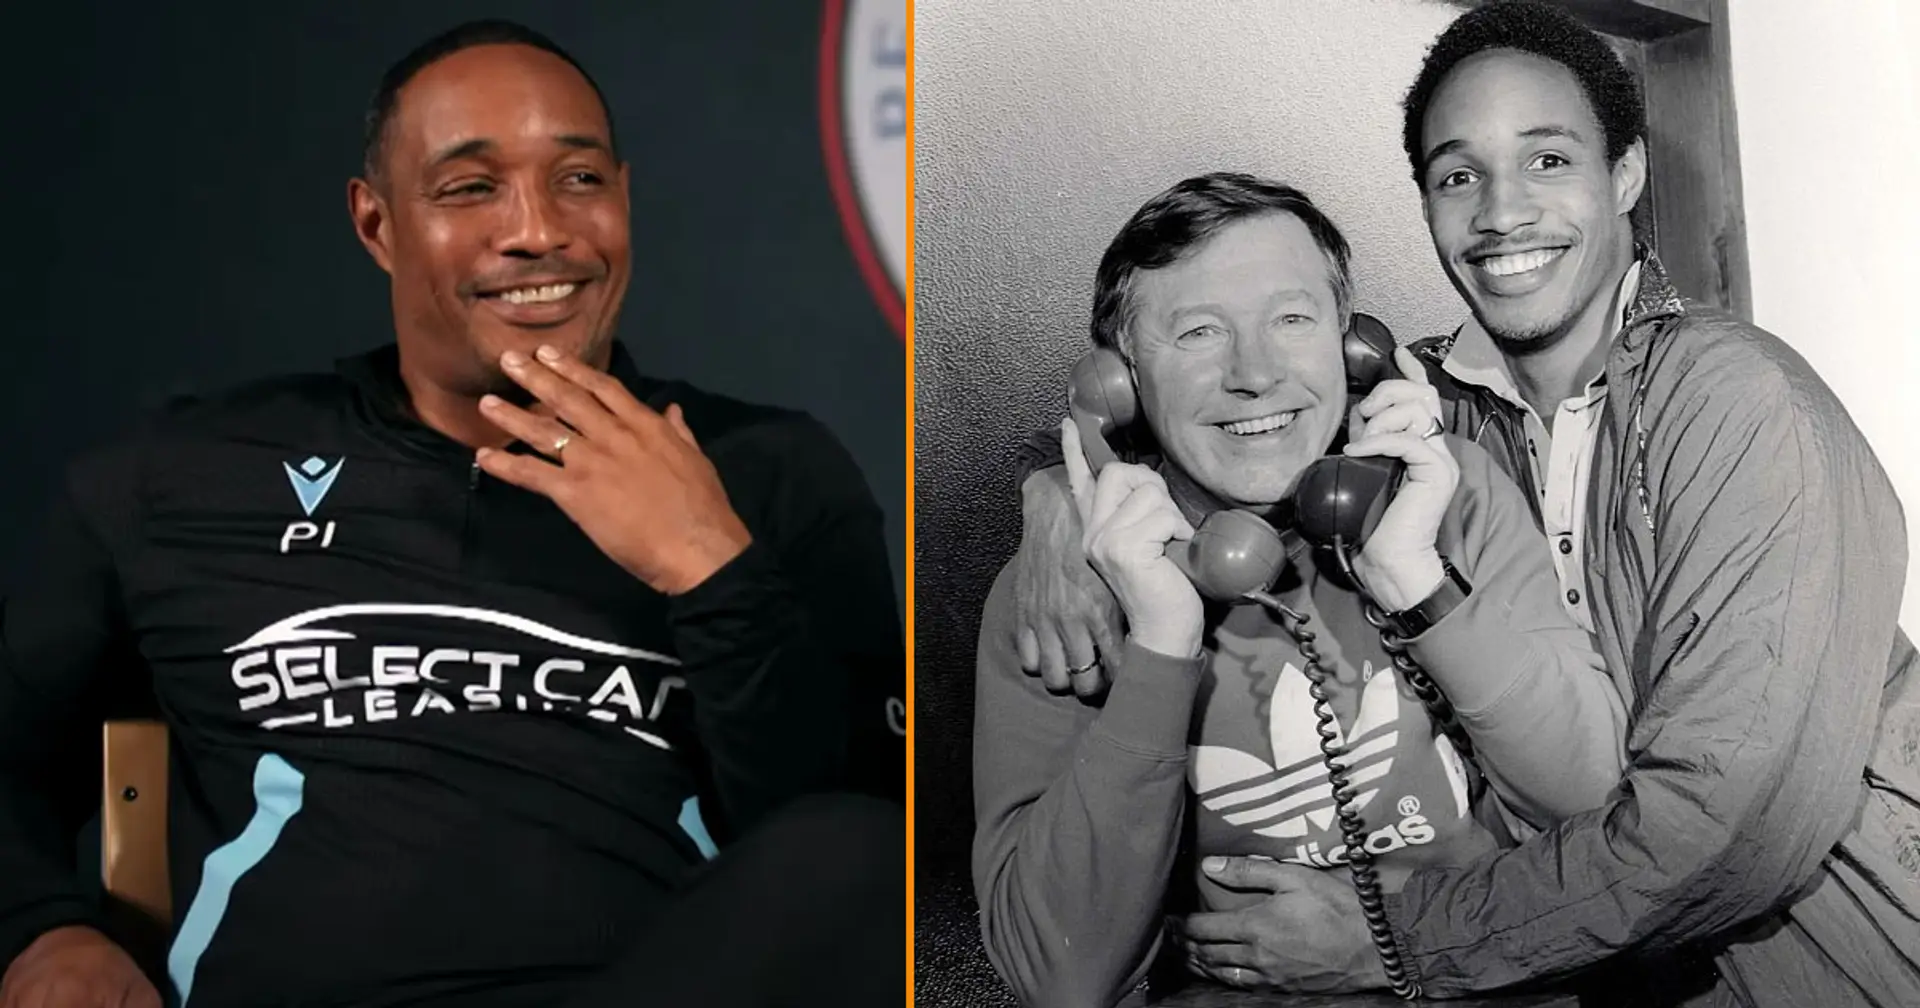 'Have you got a girlfriend?': 3 questions Sir Alex Ferguson asked every new player